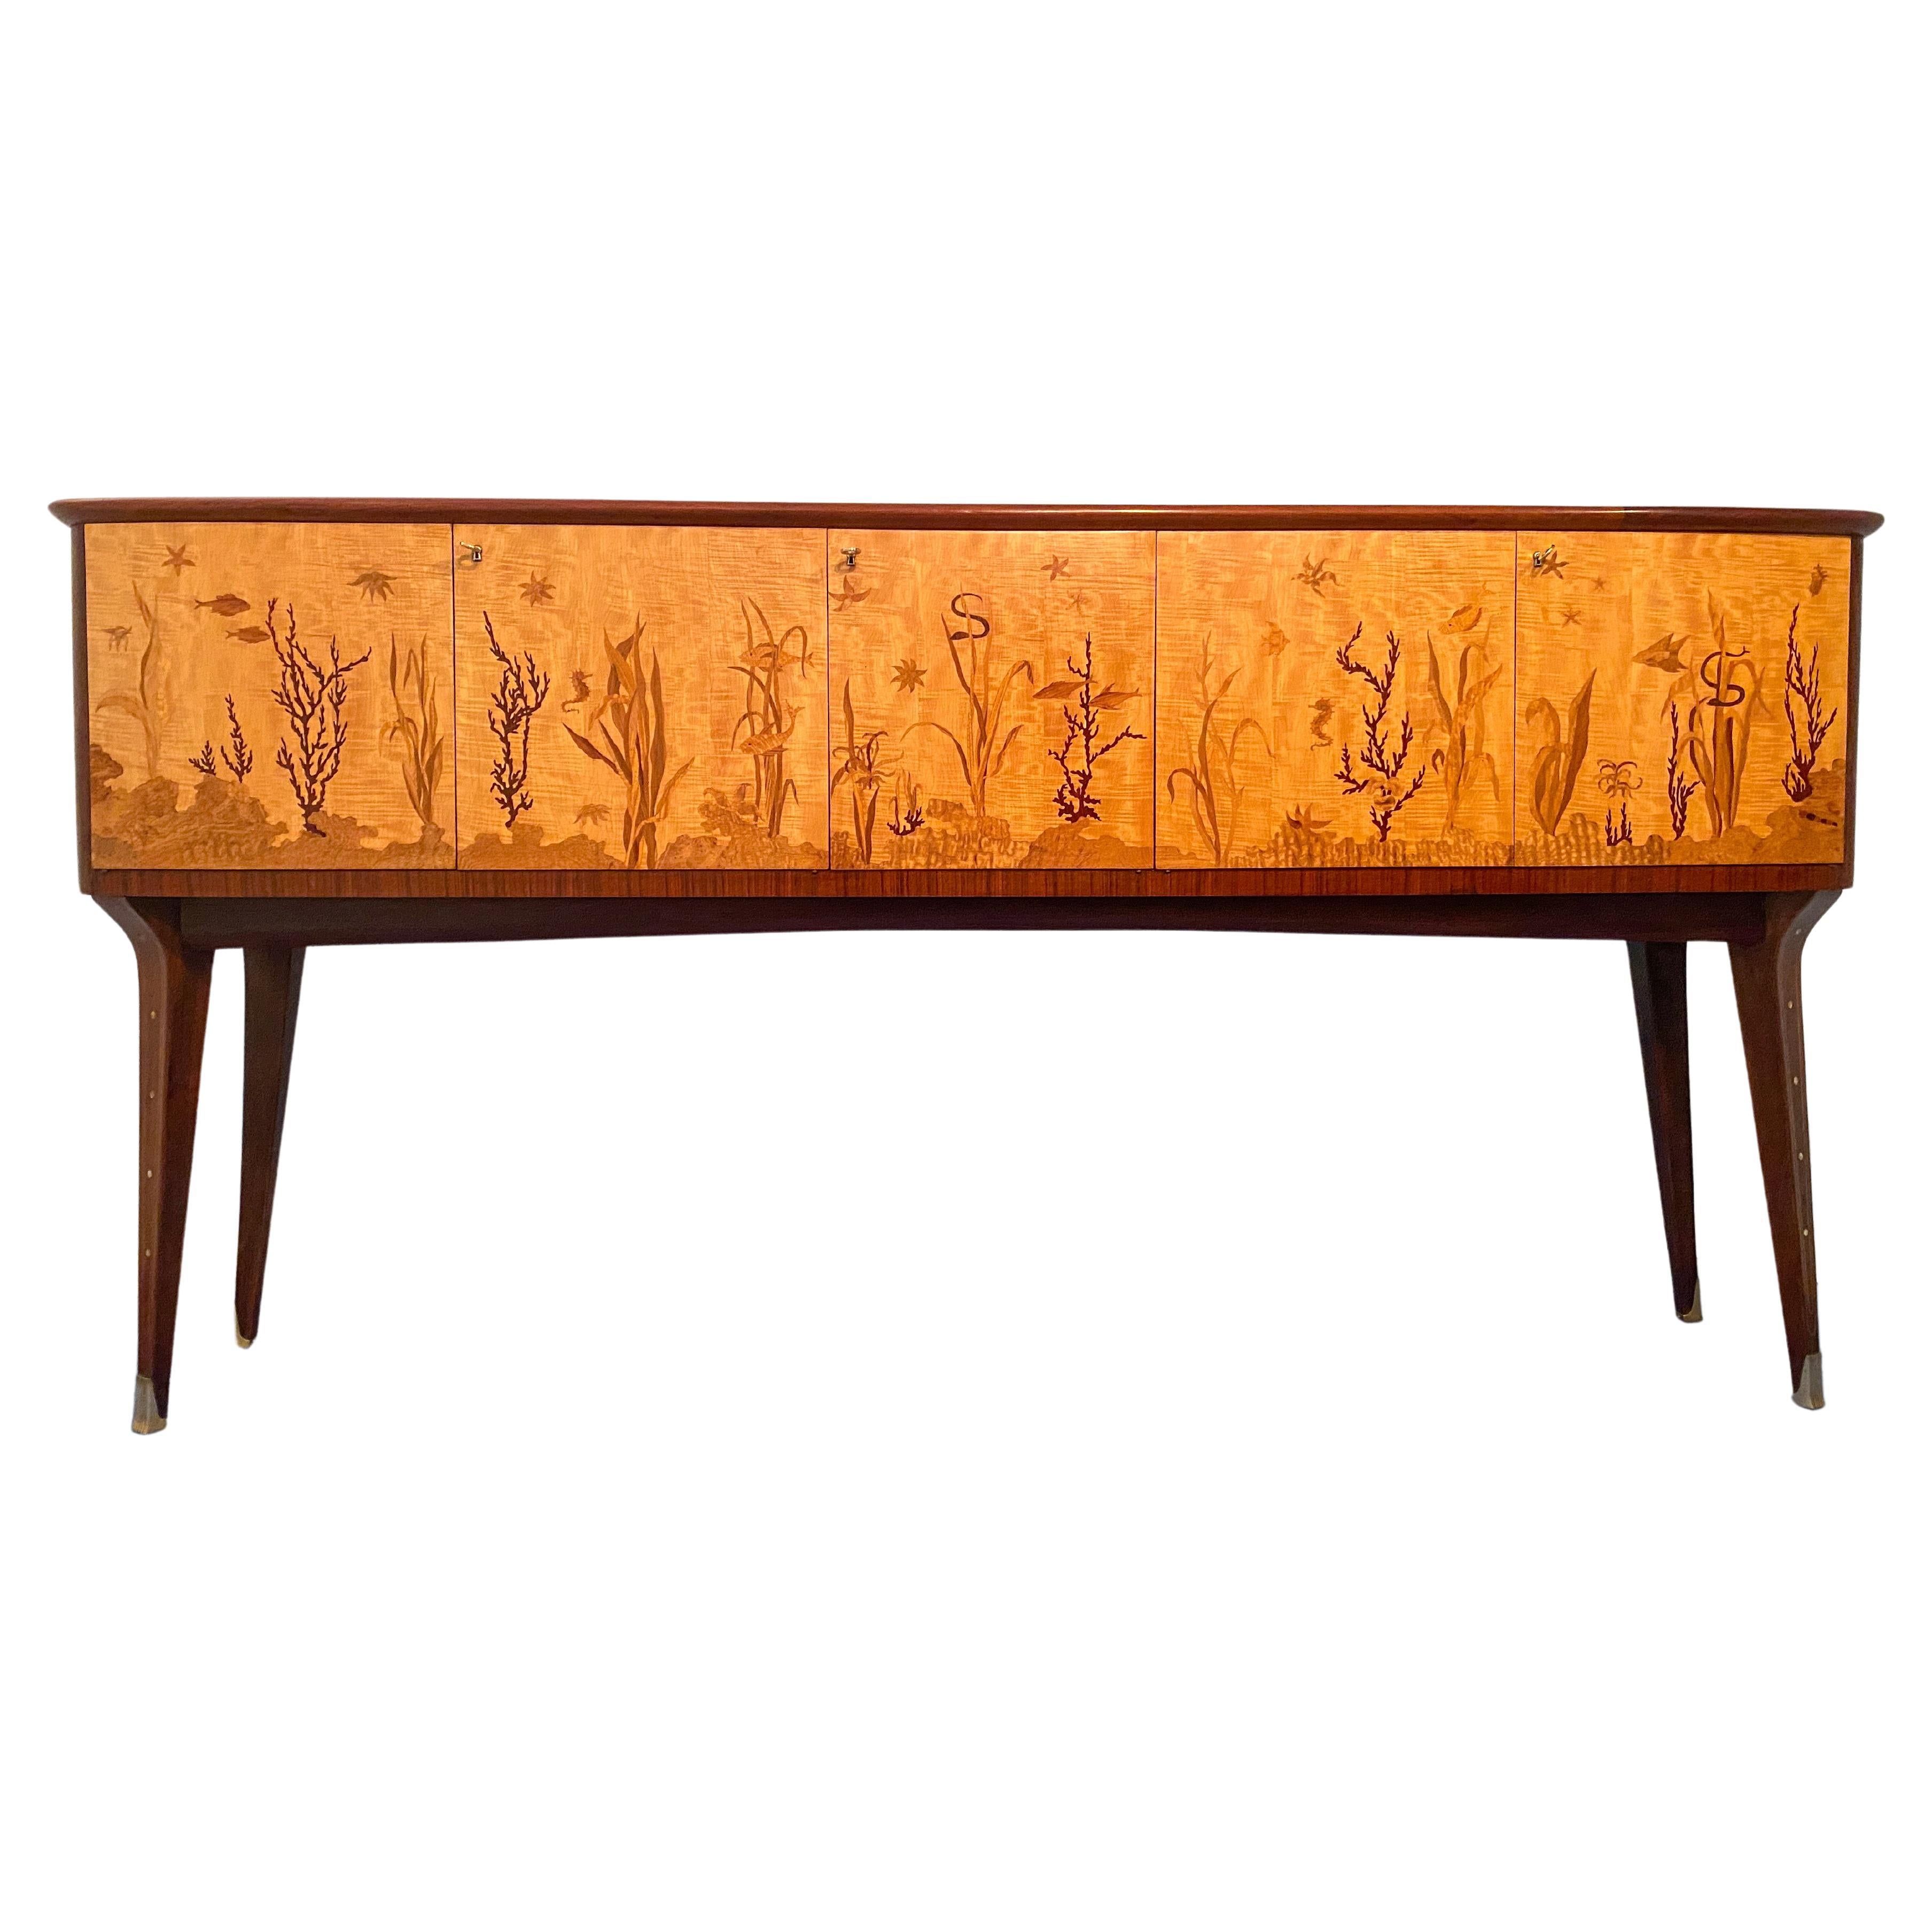 Italian Midcentury Inlaid Maple Sideboard by Andrea Gusmai, 1950s For Sale